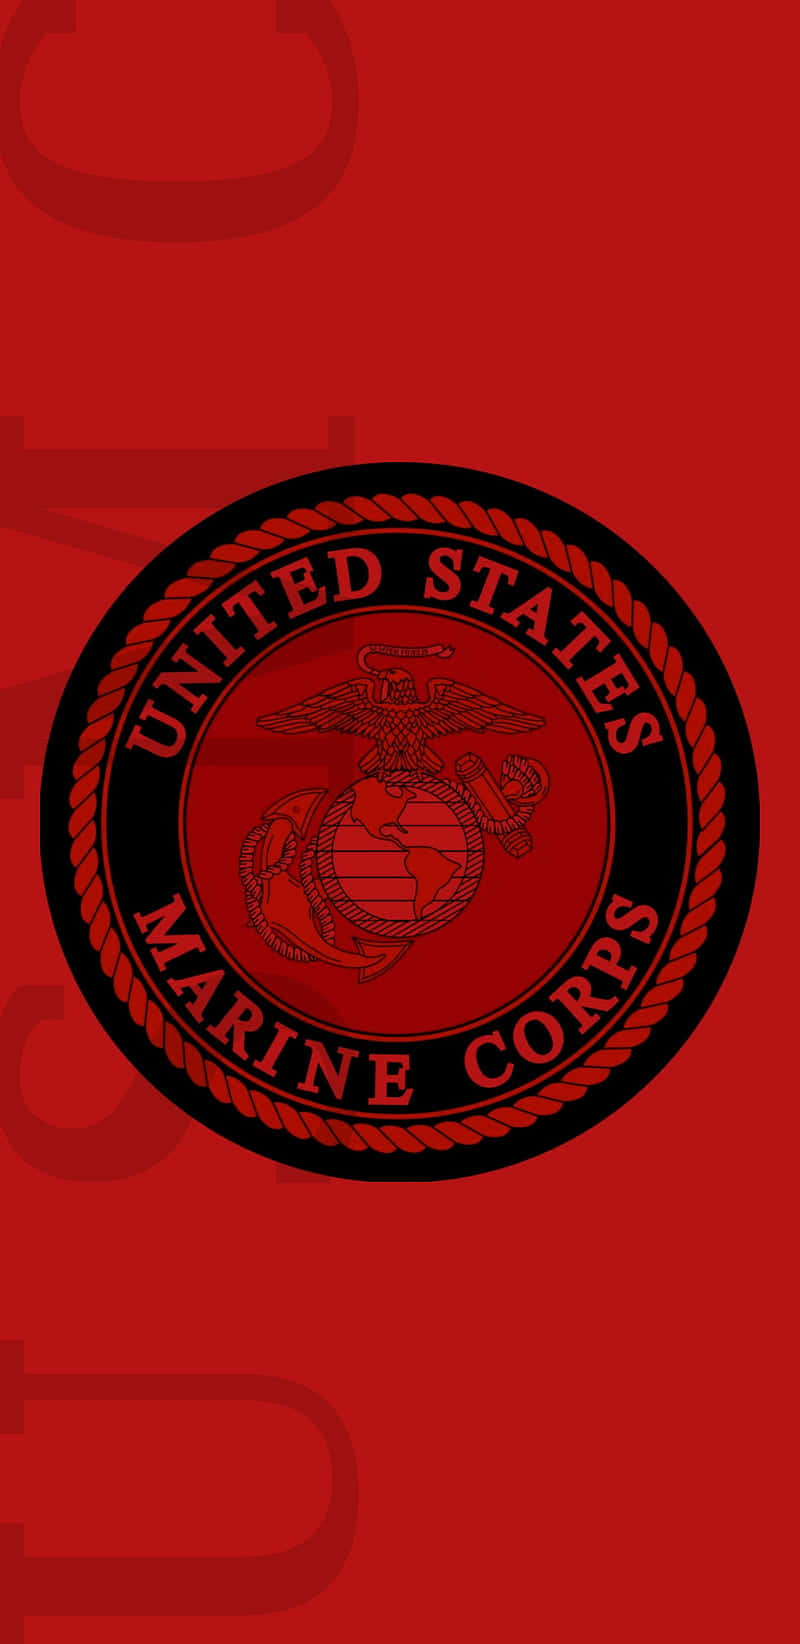 Proudly Serving The Nation: United States Marine Corps Wallpaper